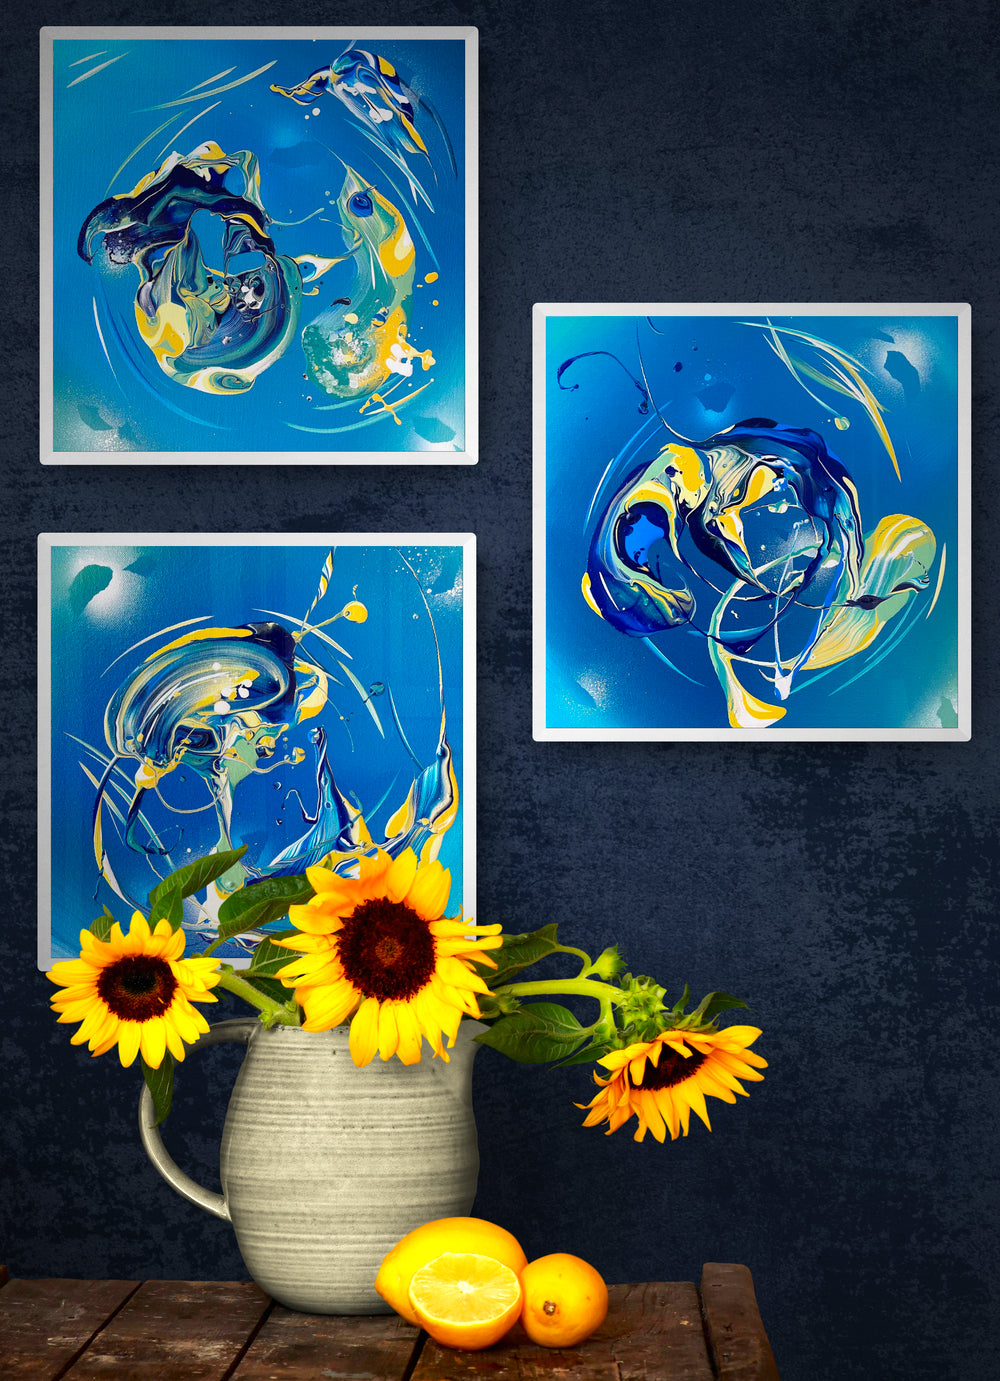 Michael Carini Van Gogh tribute paintings inspired by "The Starry Night"